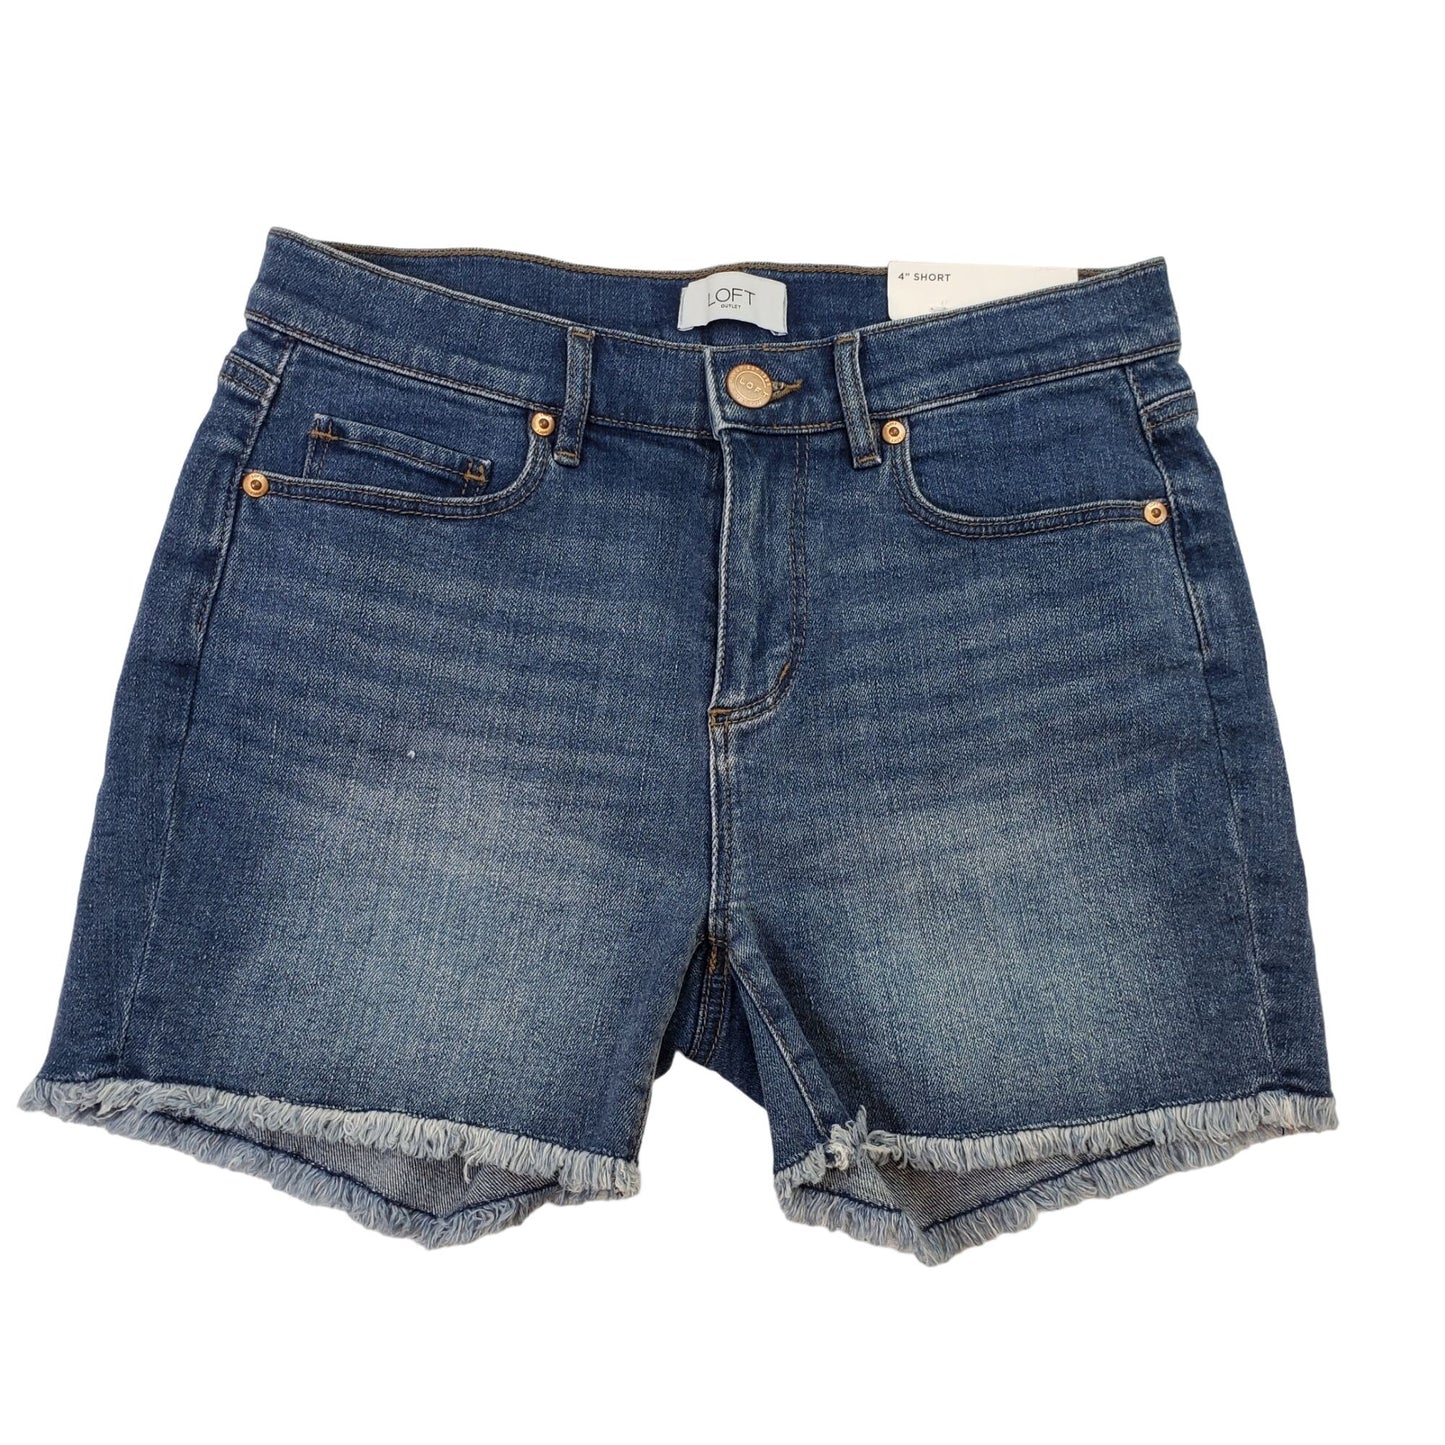 NWT Loft Outlet 4" Mid-Rise Jeans Shorts Size 0